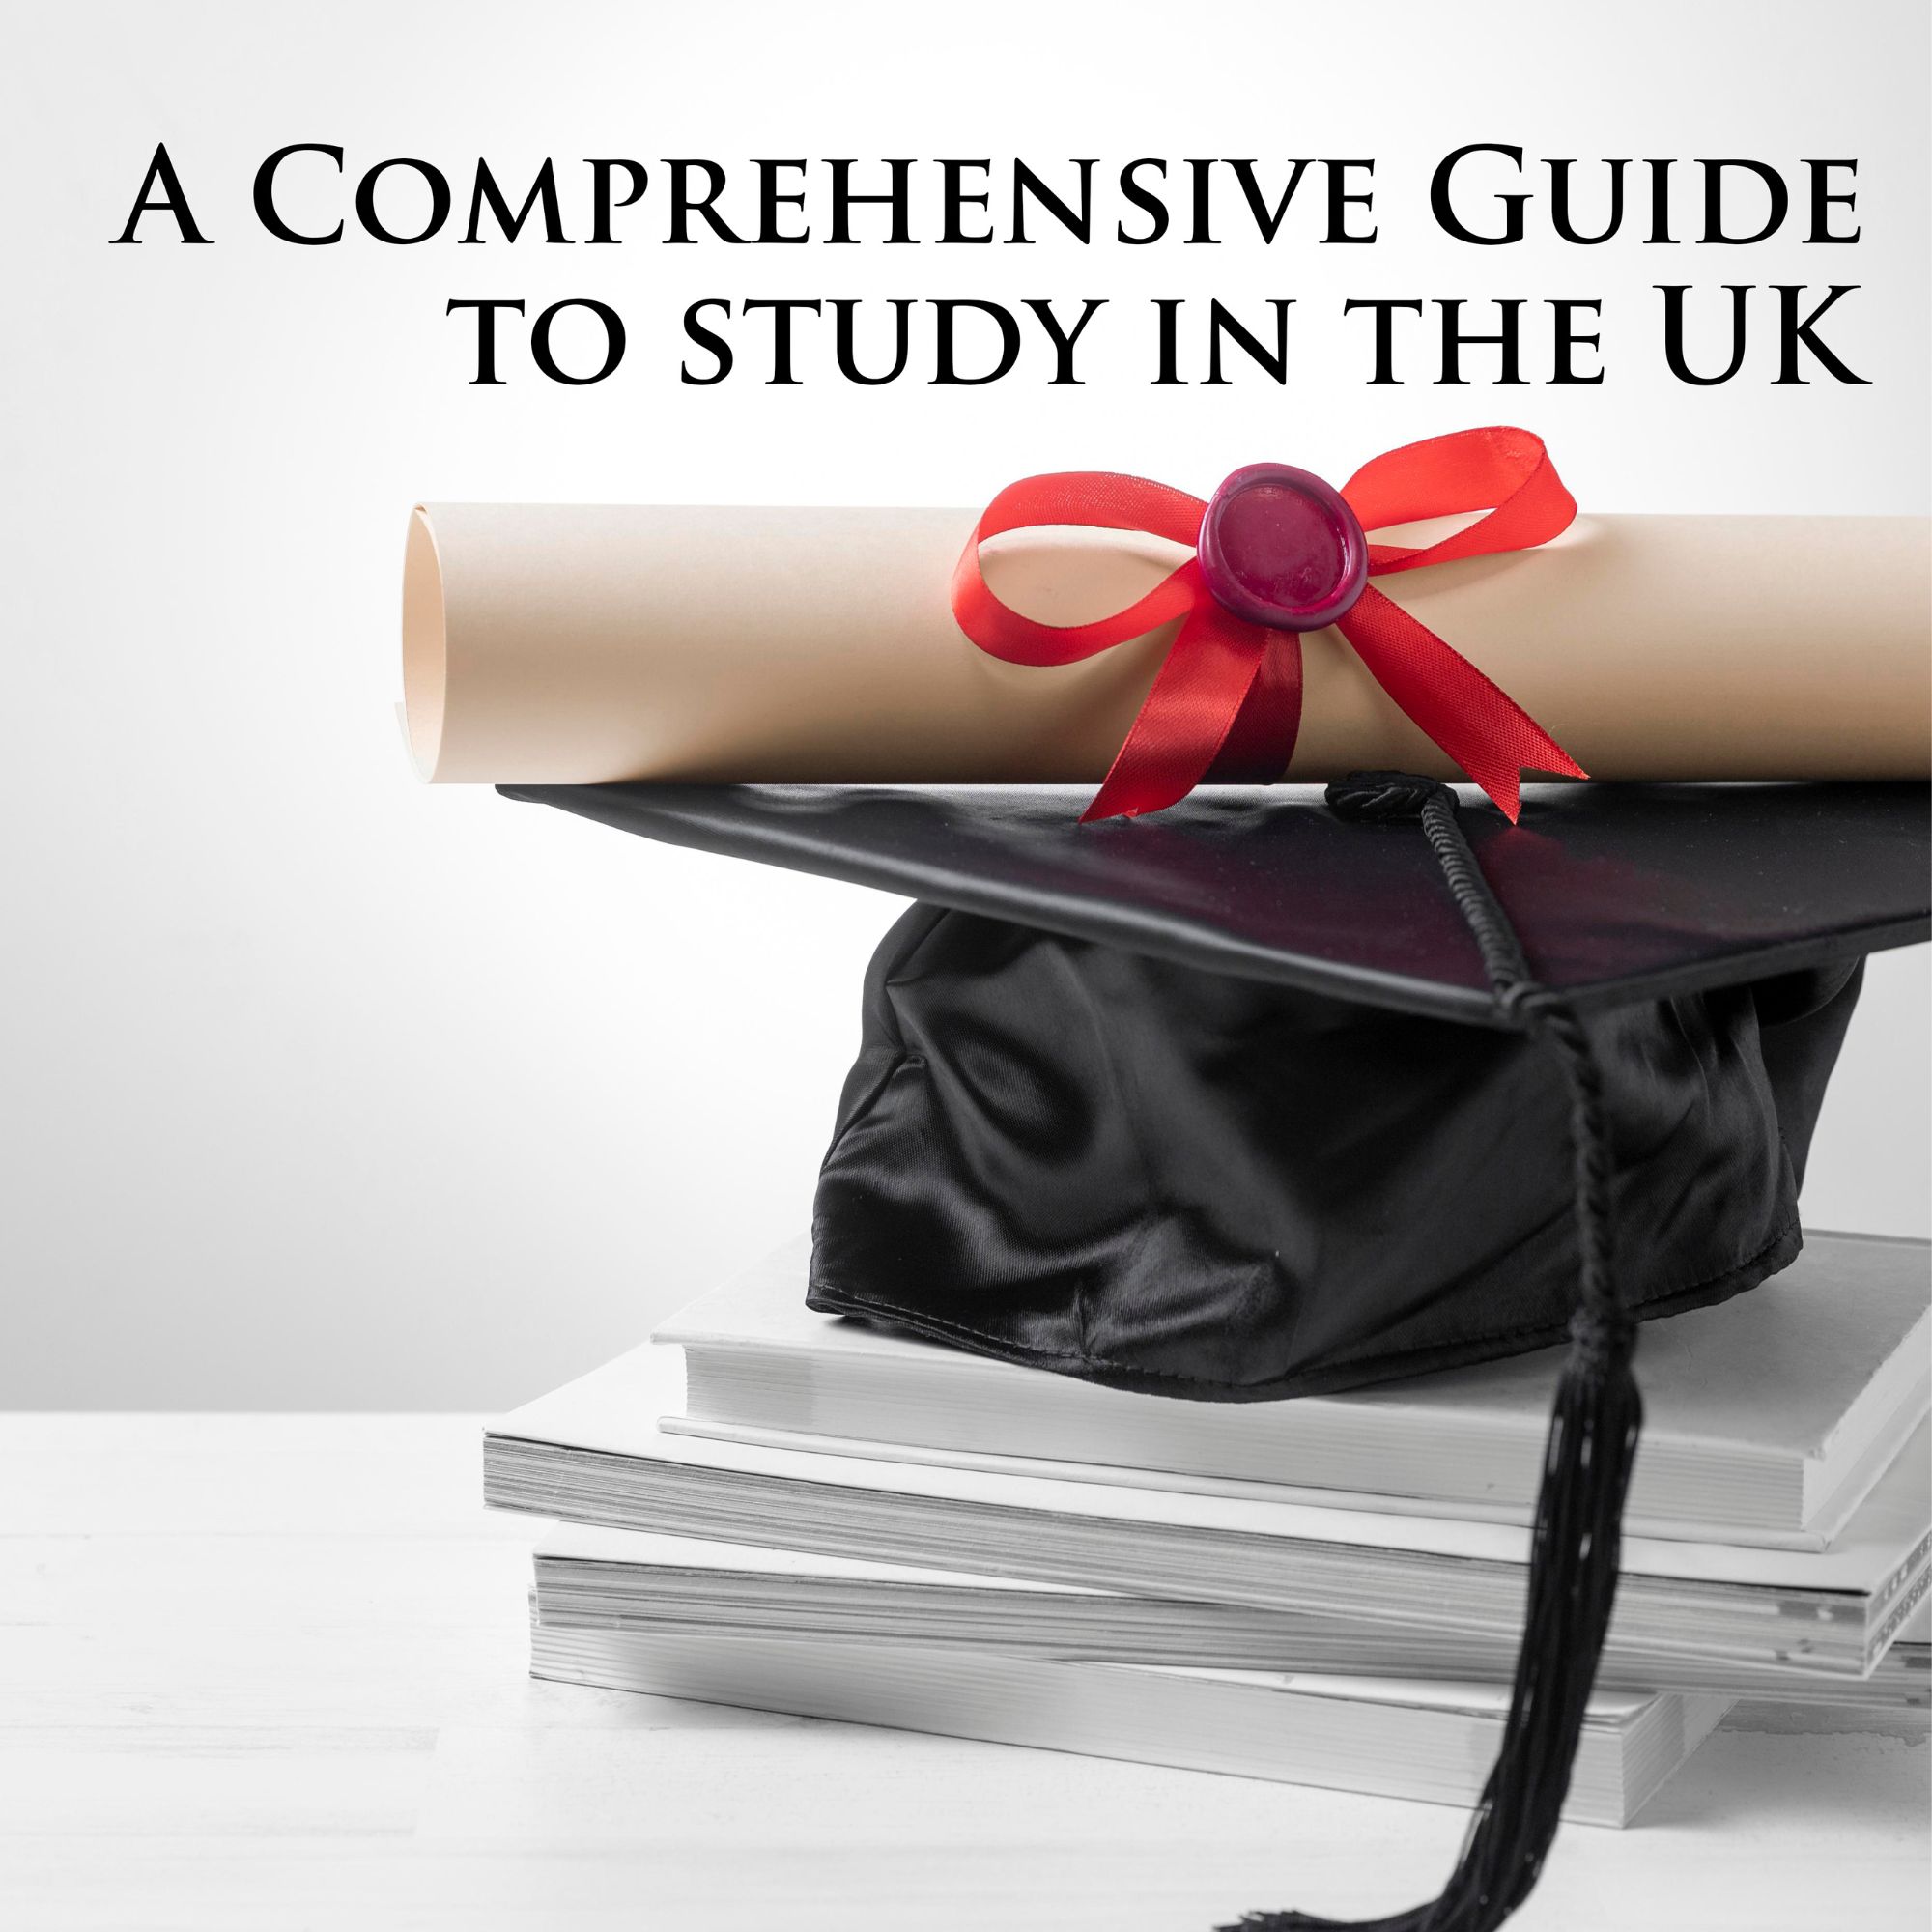 A Comprehensive Guide to study in the UK